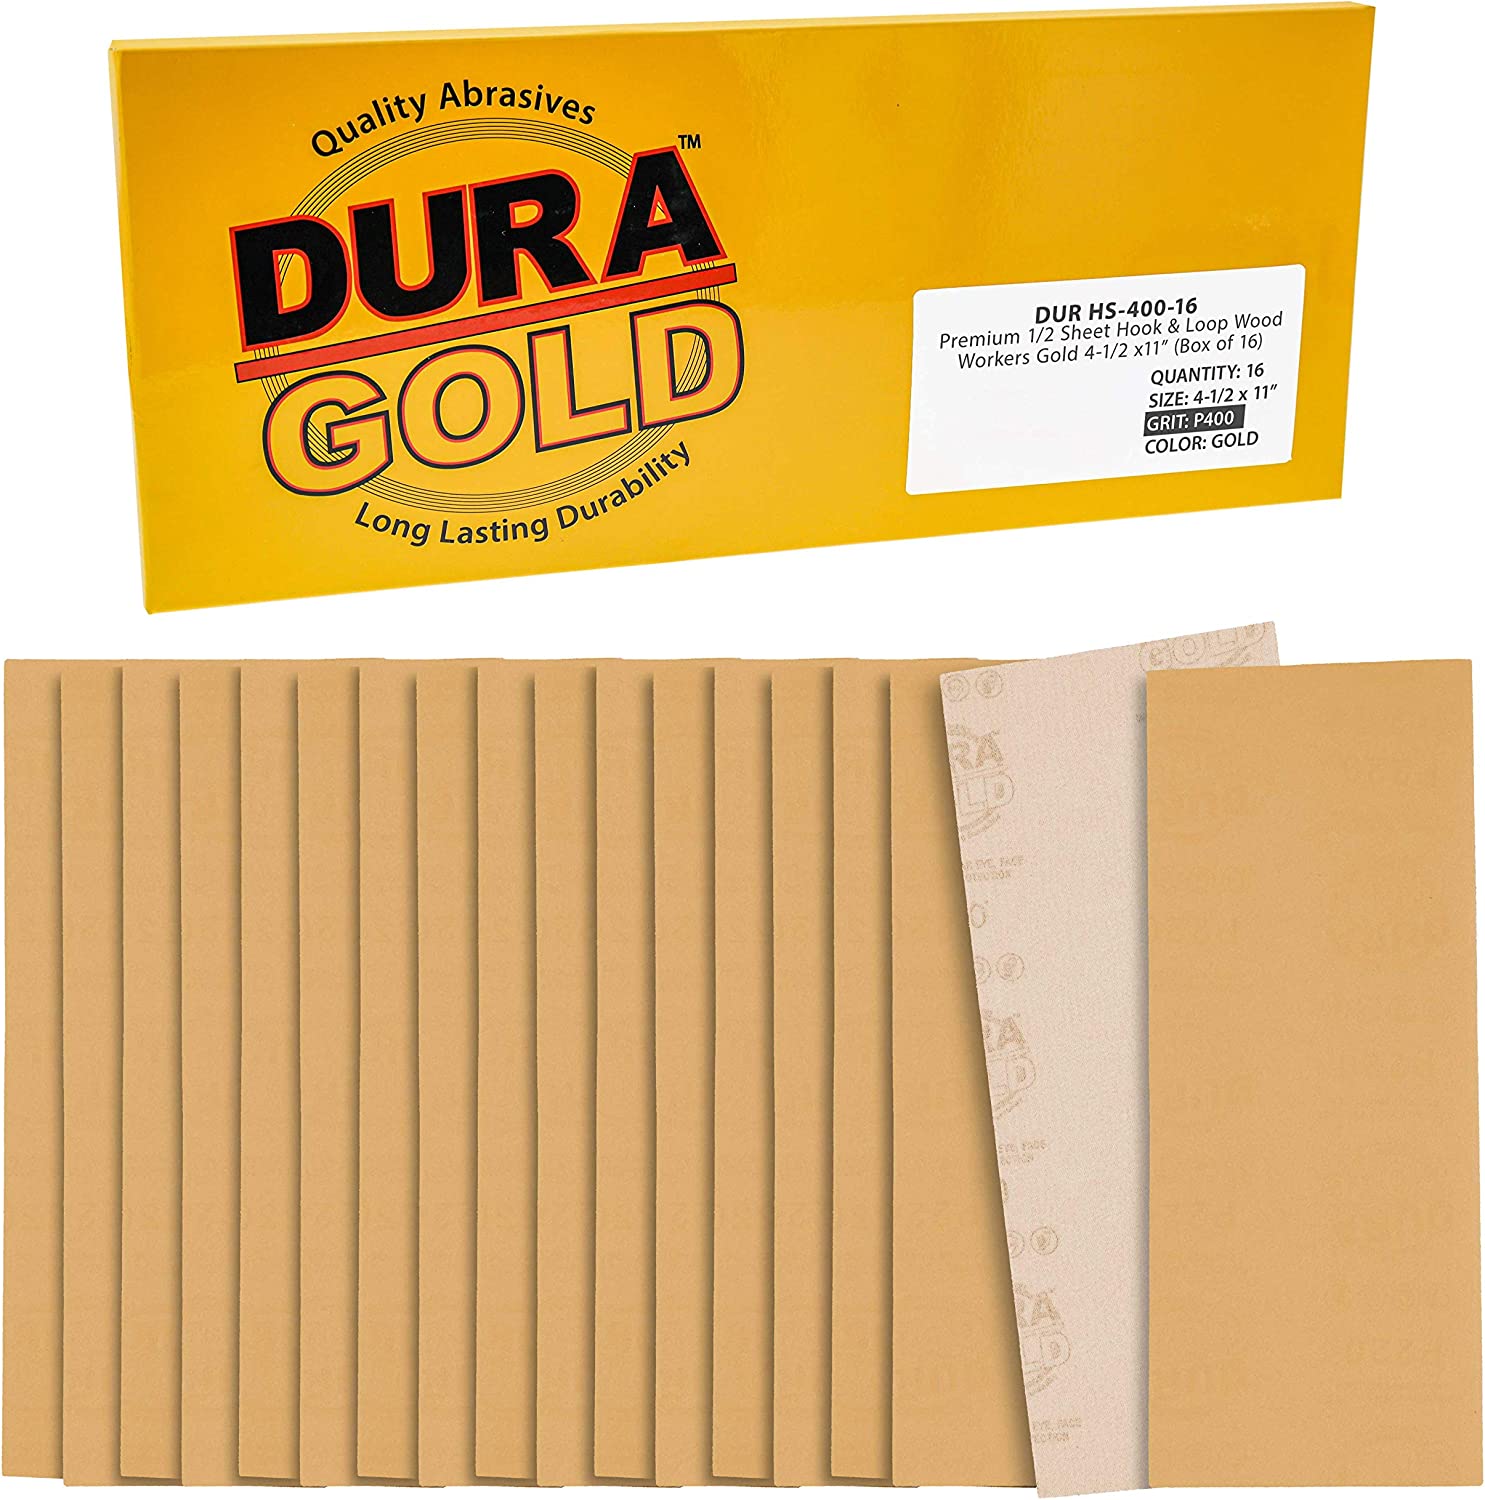 16-Count 4.5" x 11" (1/2 Sheet) Dura-Gold Premium Gold Sandpaper Sheets (400-Grit) $6 + Free Shipping w/ Prime or on $25+.